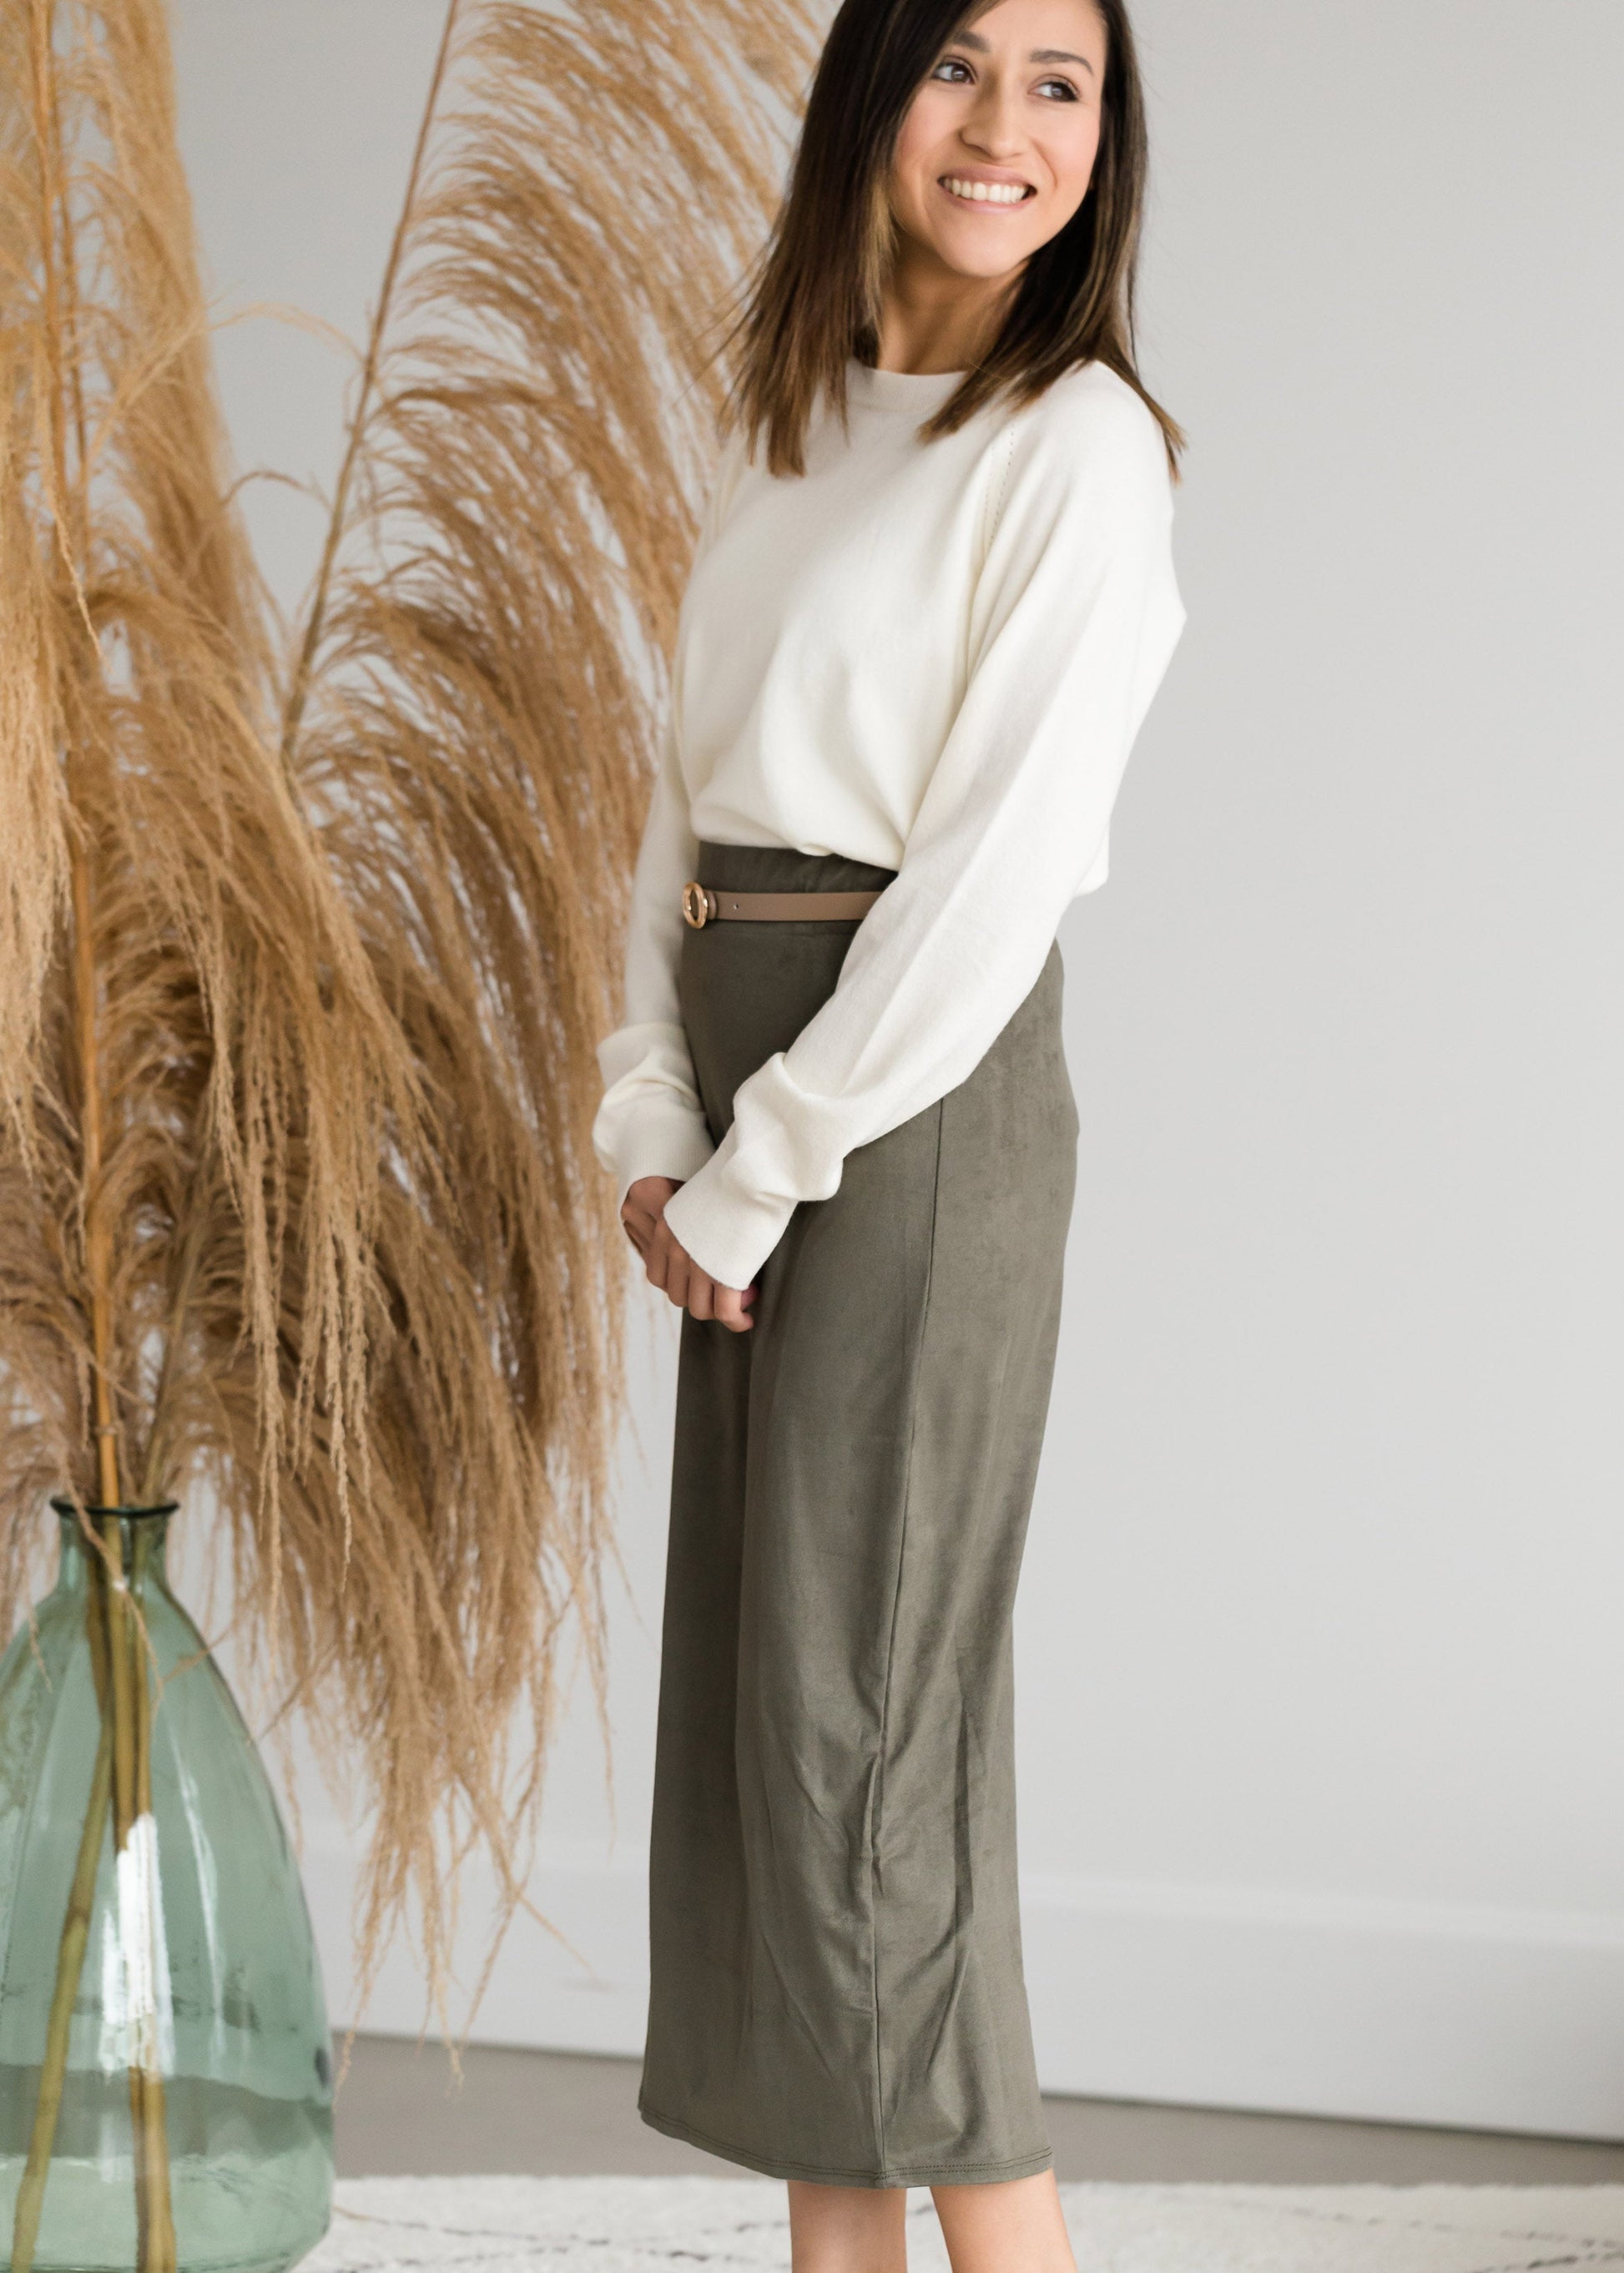 Suede Olive Pencil Midi Skirt - FINAL SALE Skirts